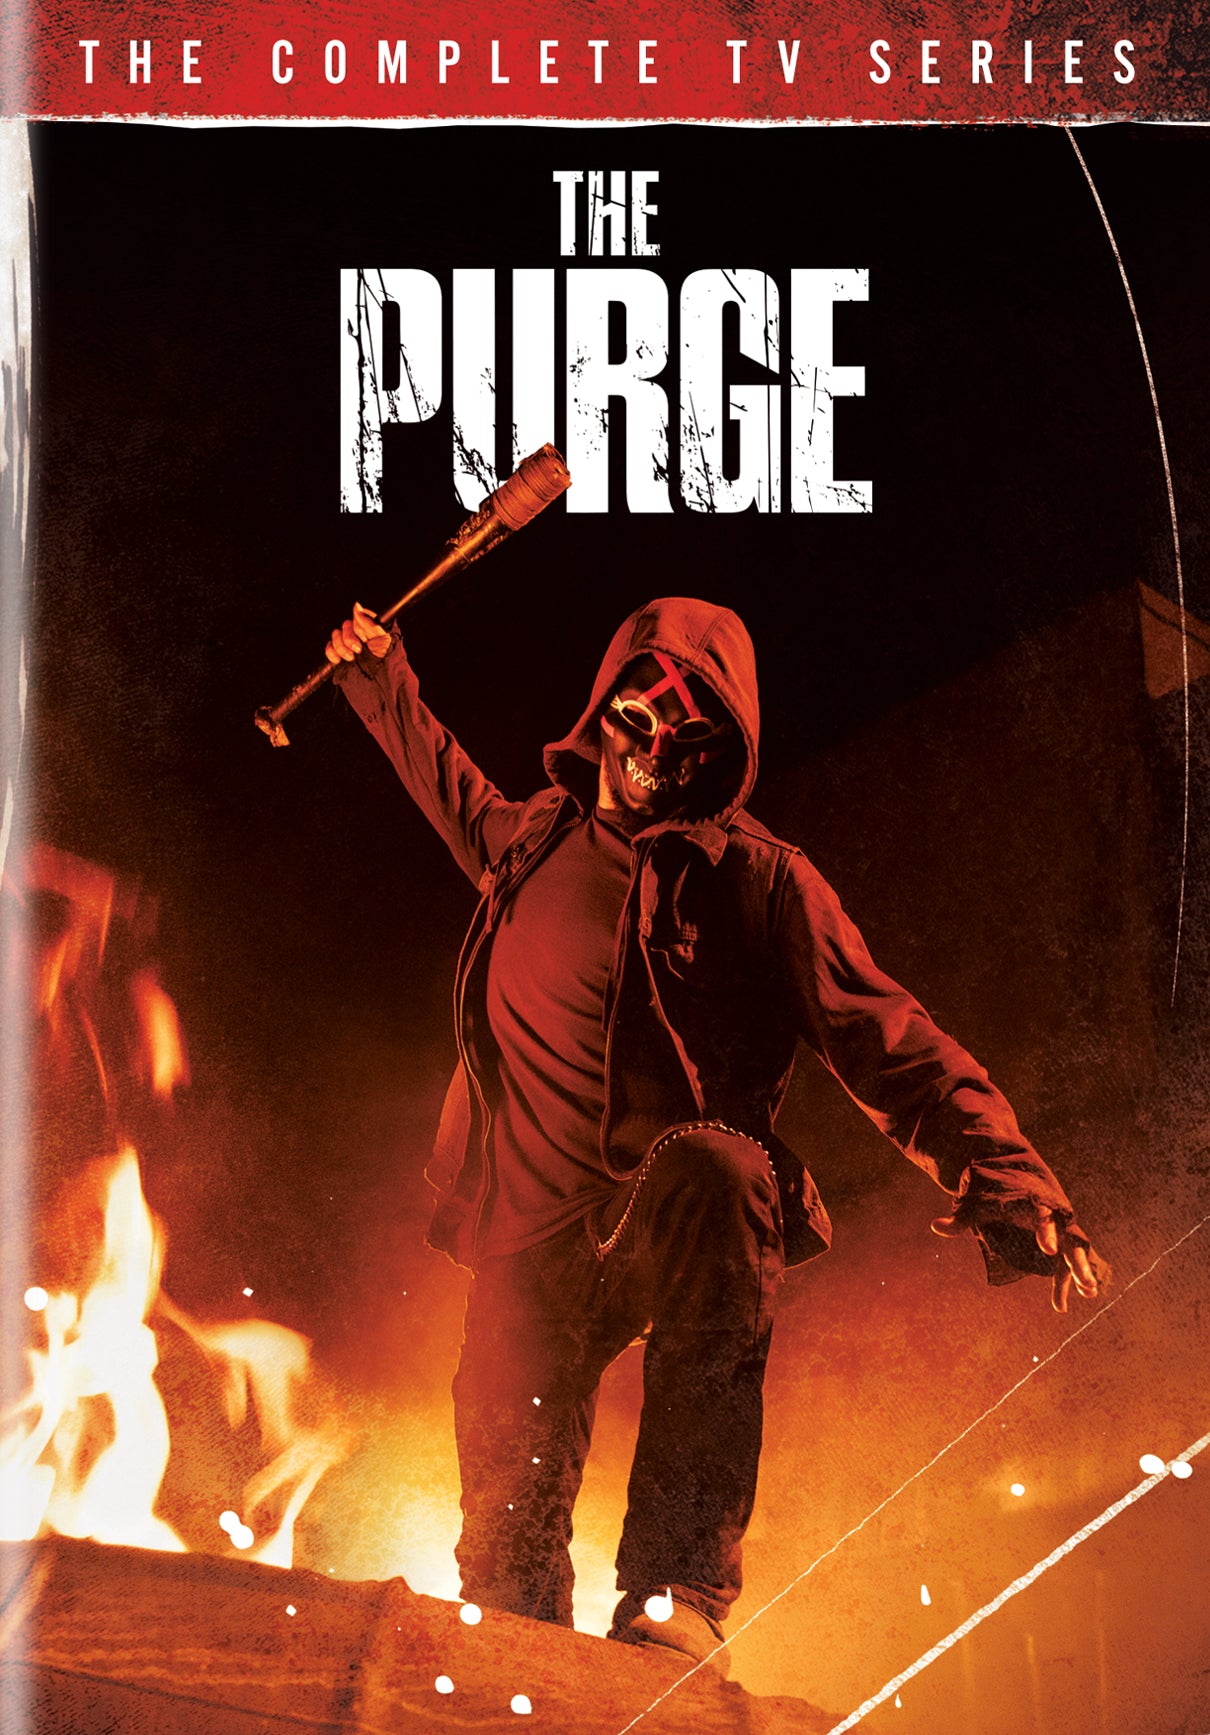 Purge: The Complete TV Series cover art